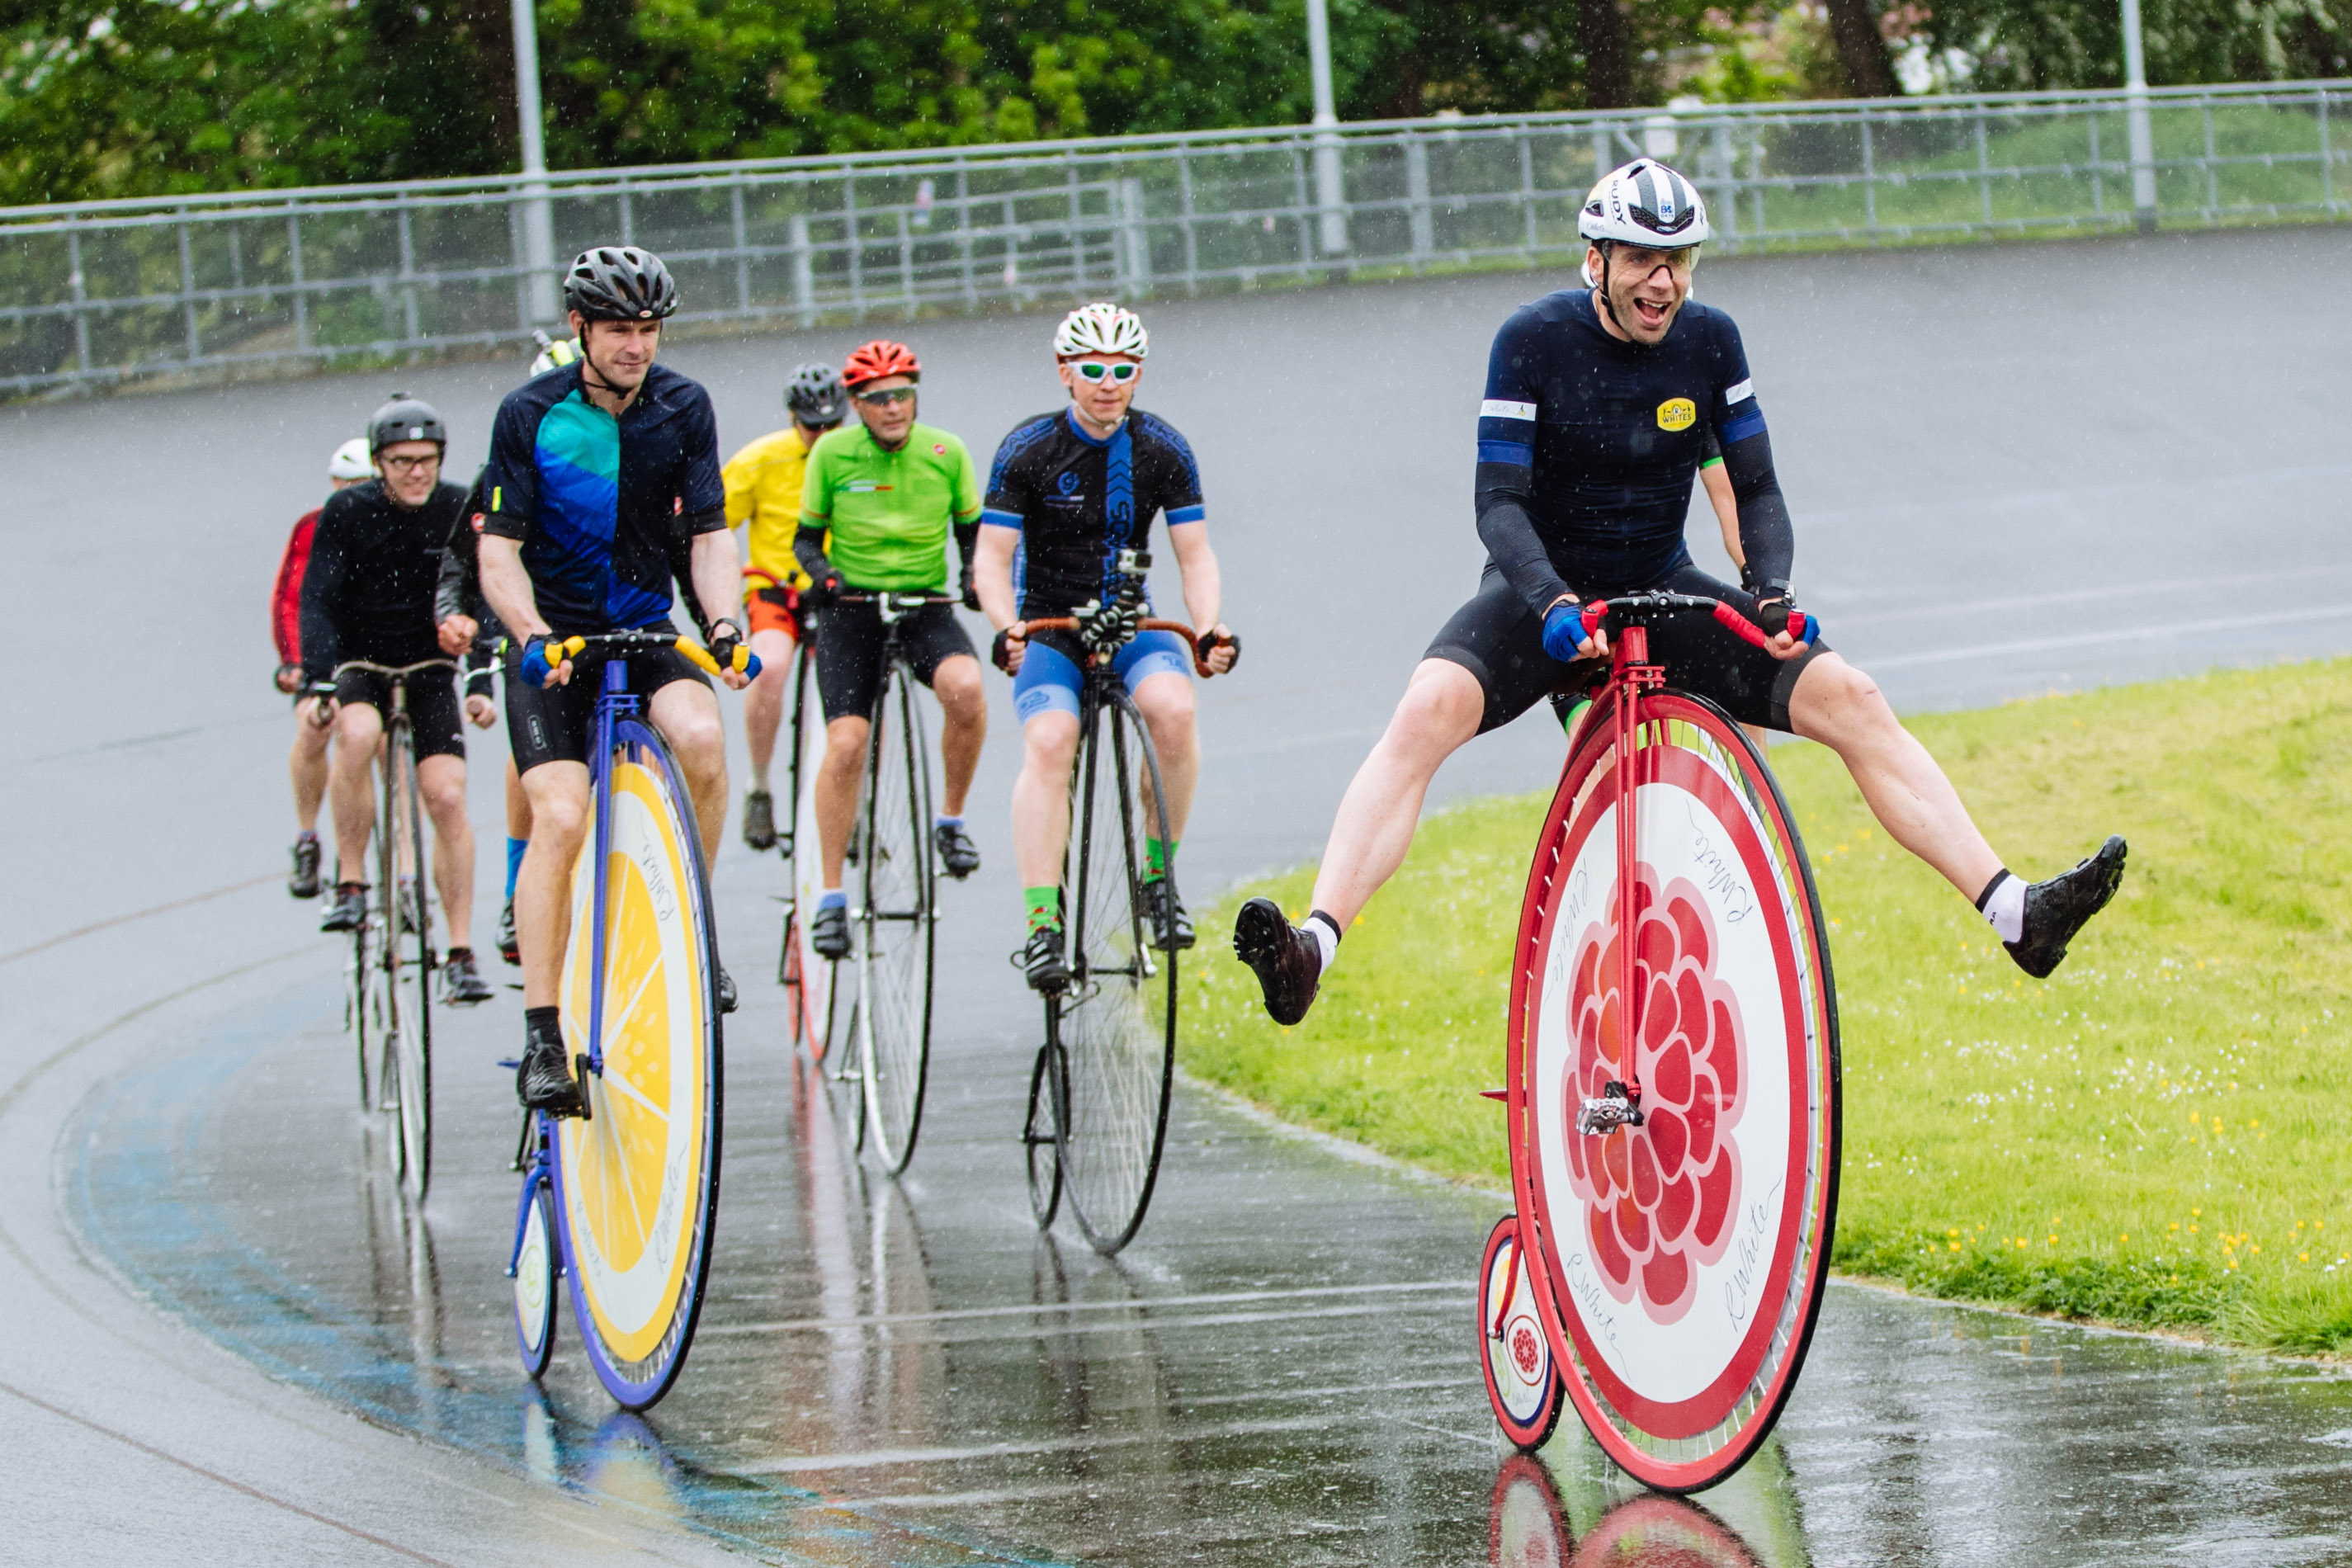 World record attempt on penny farthing